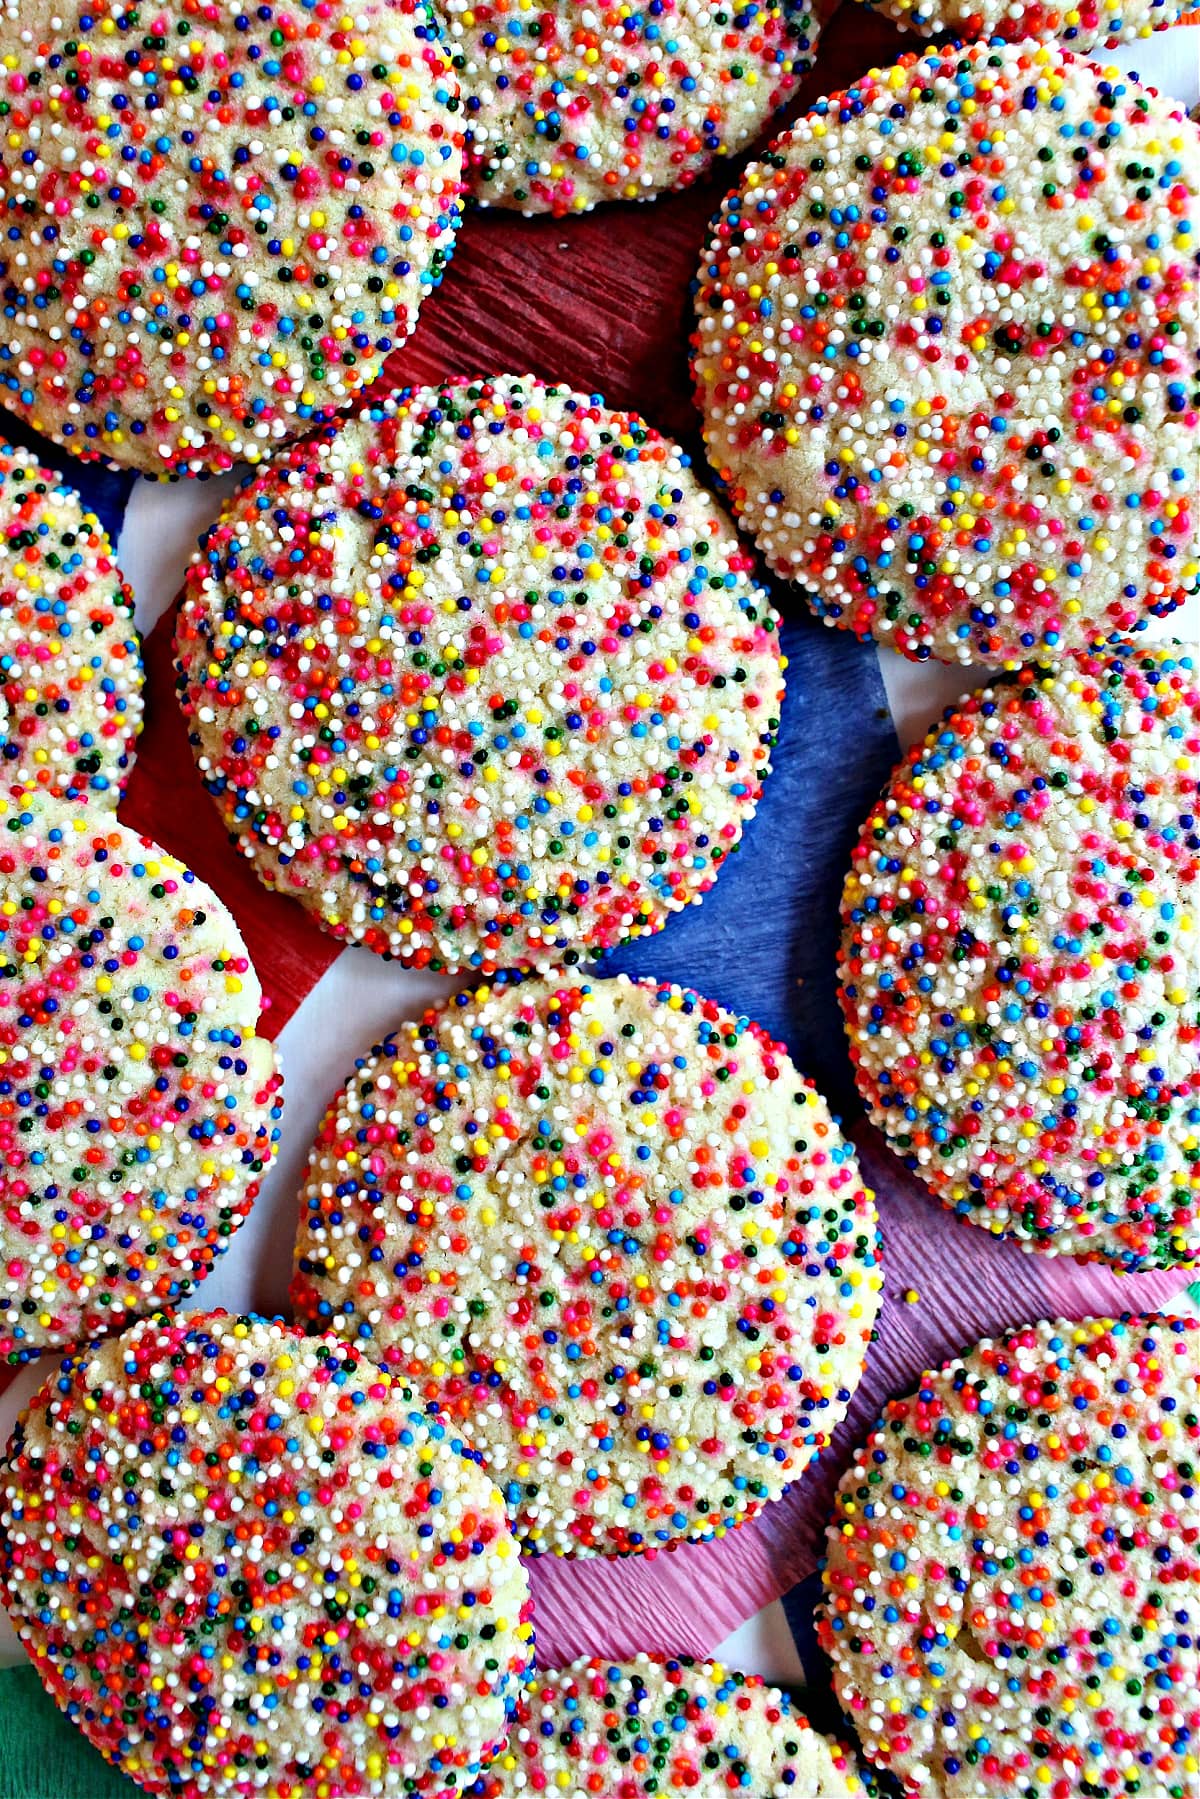 Large, round sugar cookies coated in rainbow colored nonpareil sprinkles.